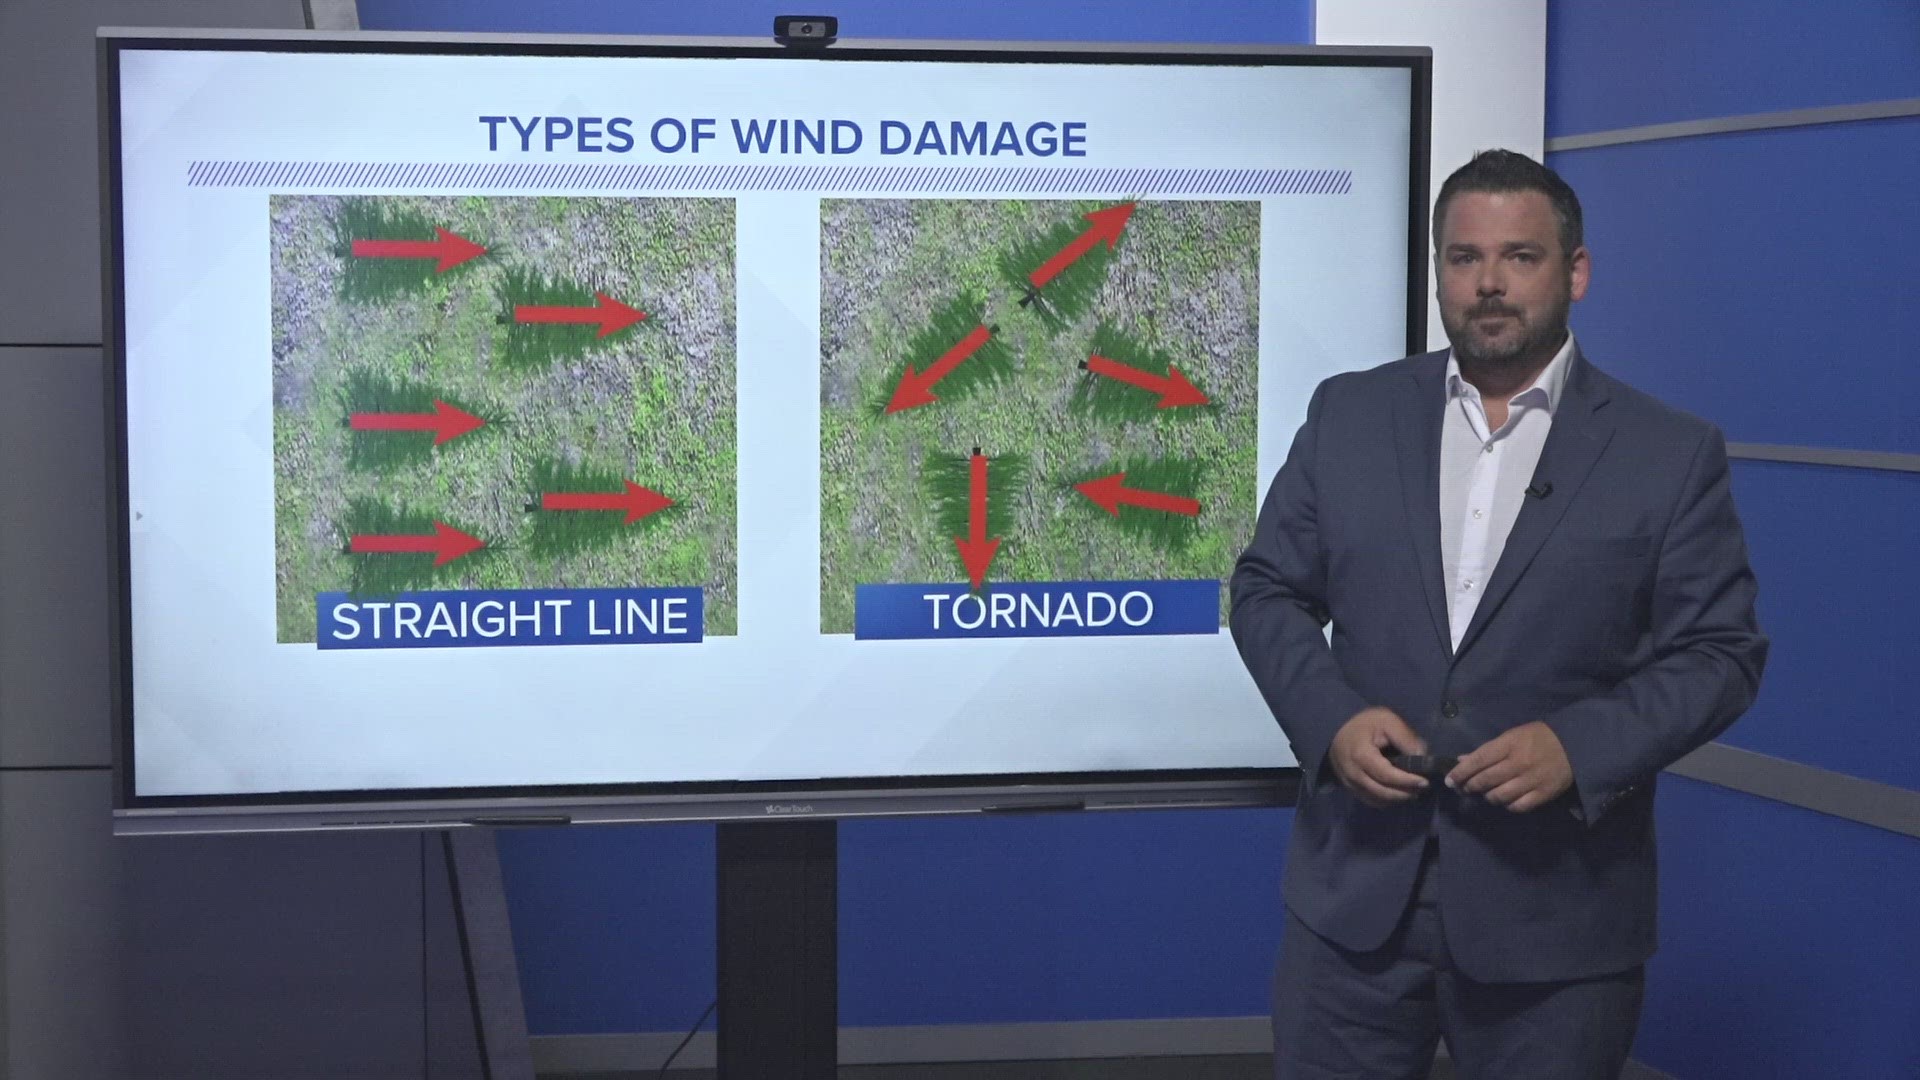 A lot of viewers said they witnessed a tornado following storms, but it was just straight-line wind damage.